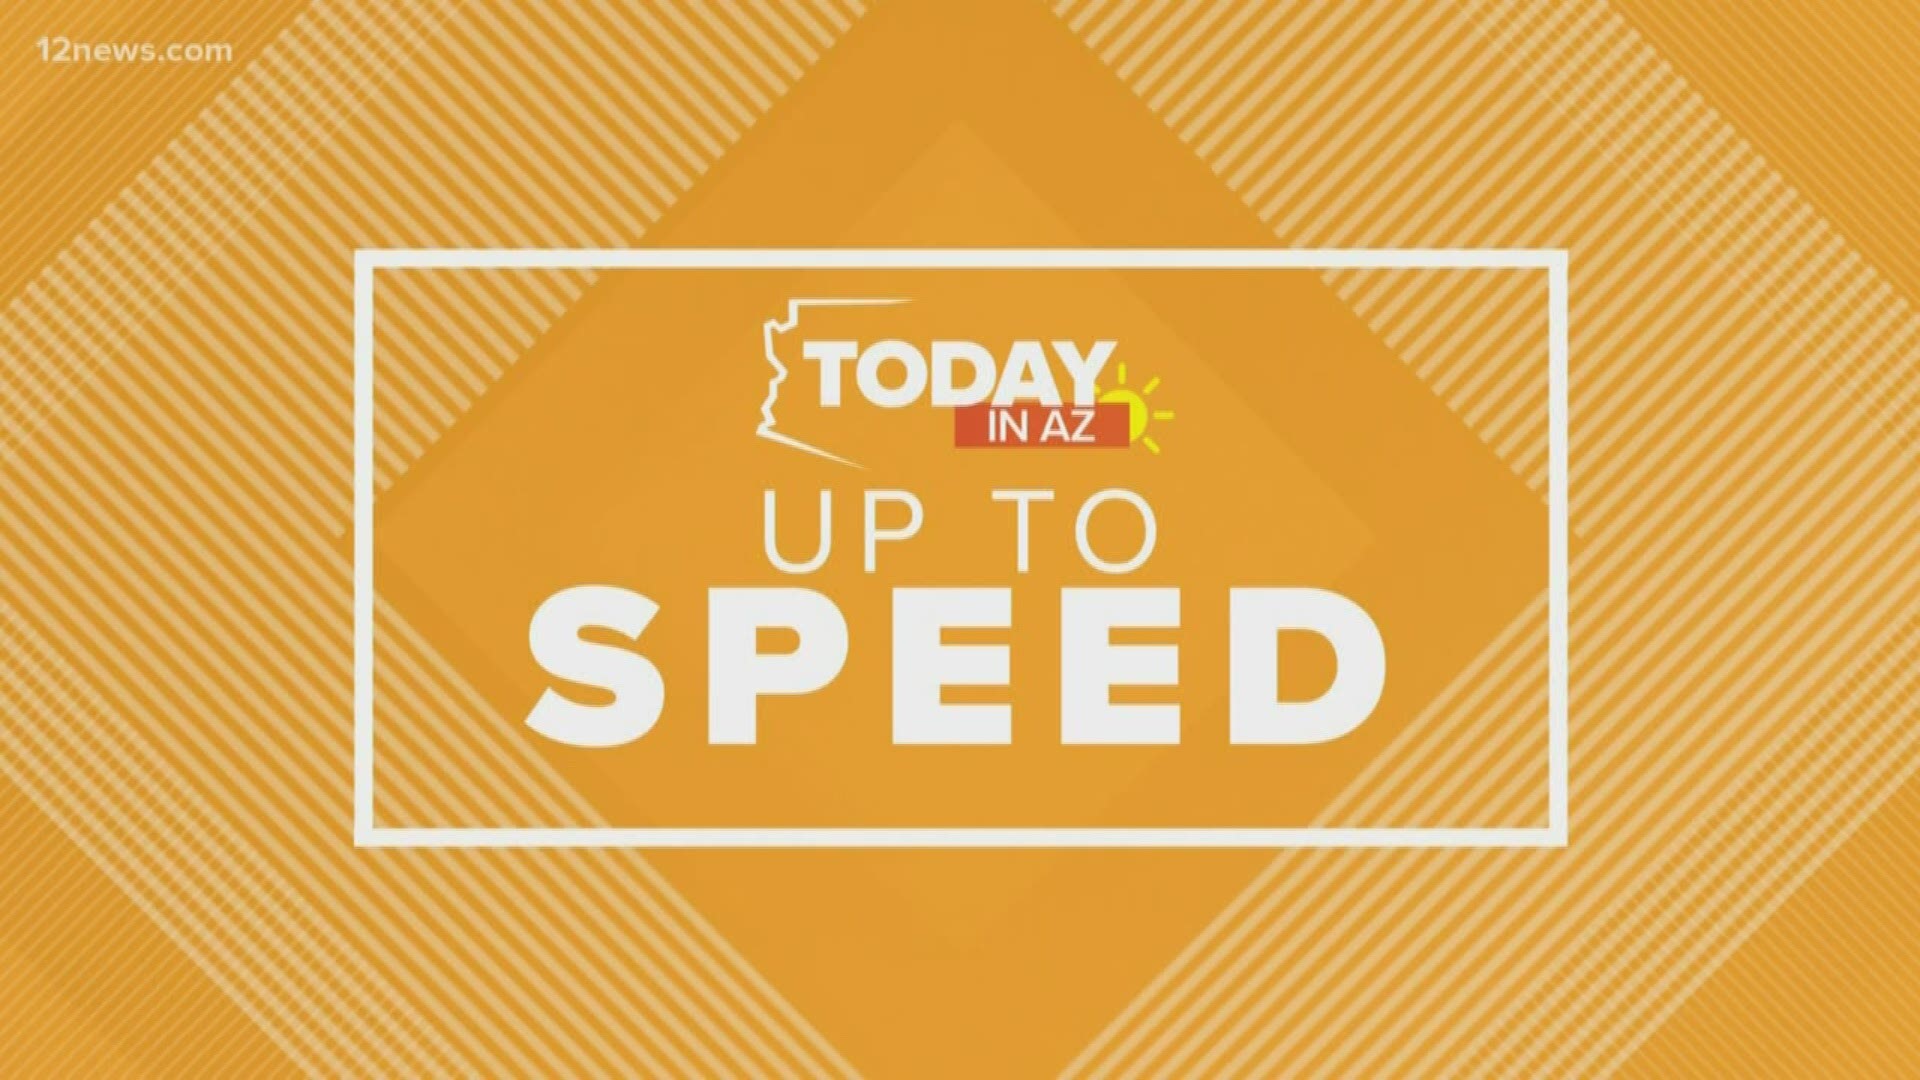 Get "Up to Speed" on the latest news happening around the Valley and across Arizona on Saturday morning.